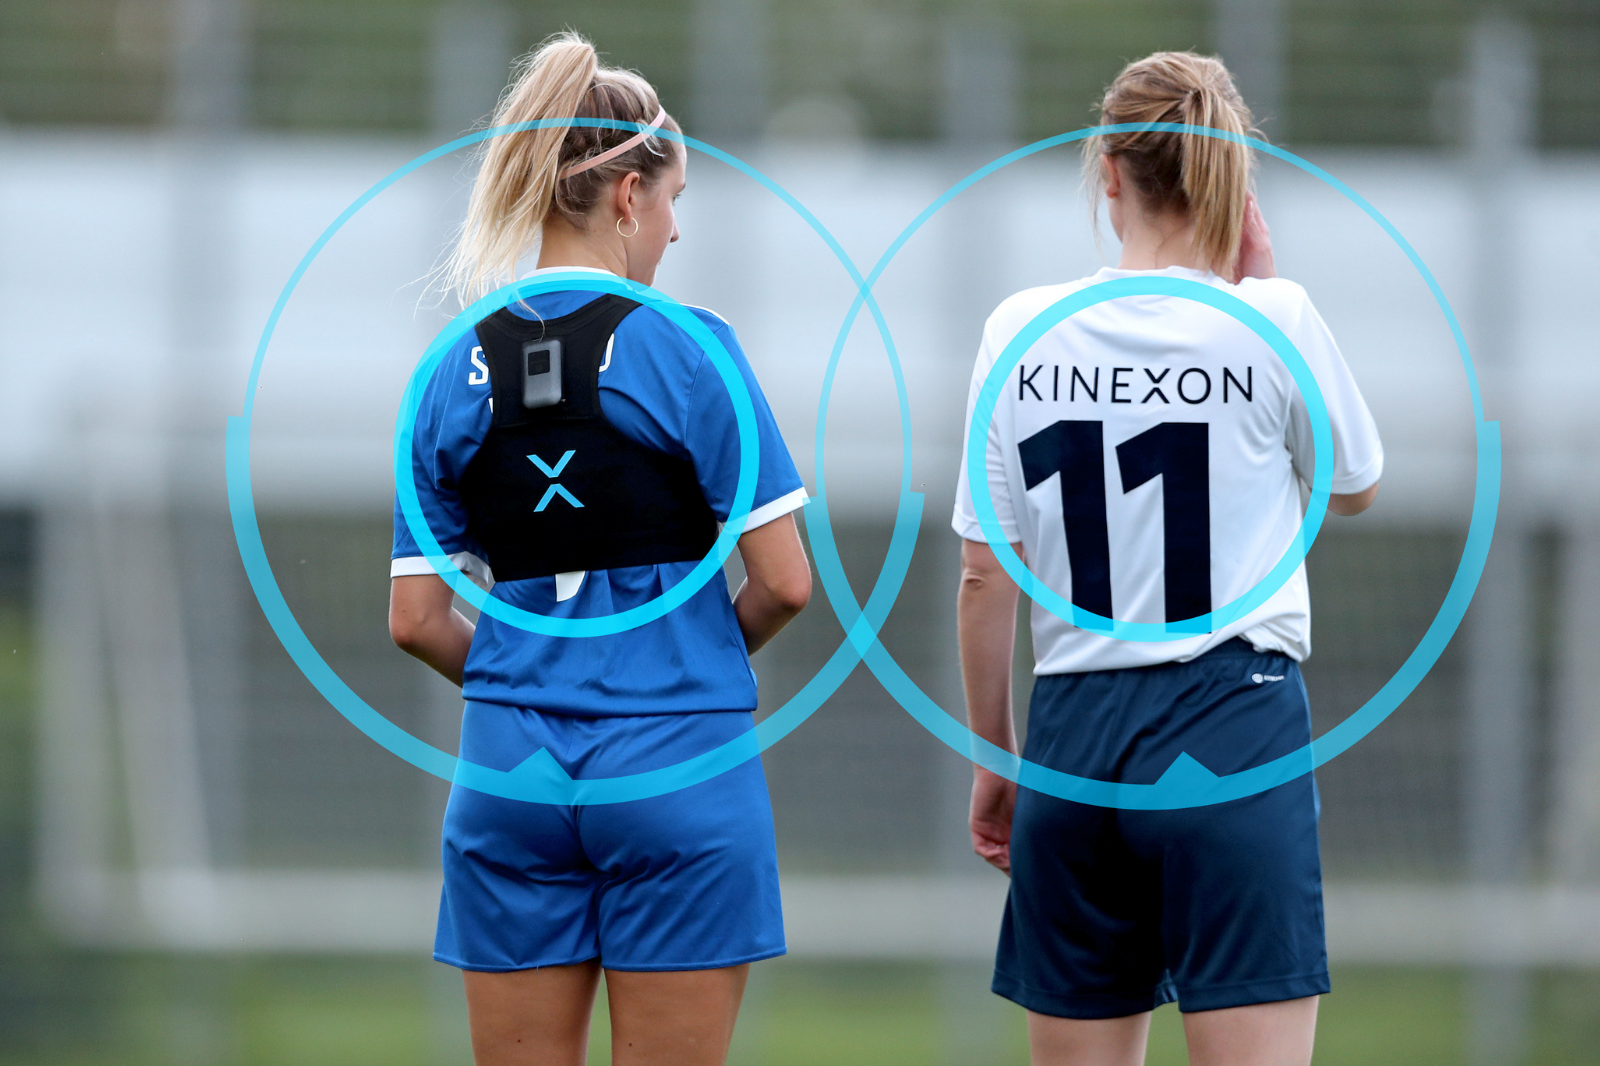 Two women athletes equipped with mobile player tracking devices discuss strategies during a timeout at a training session.